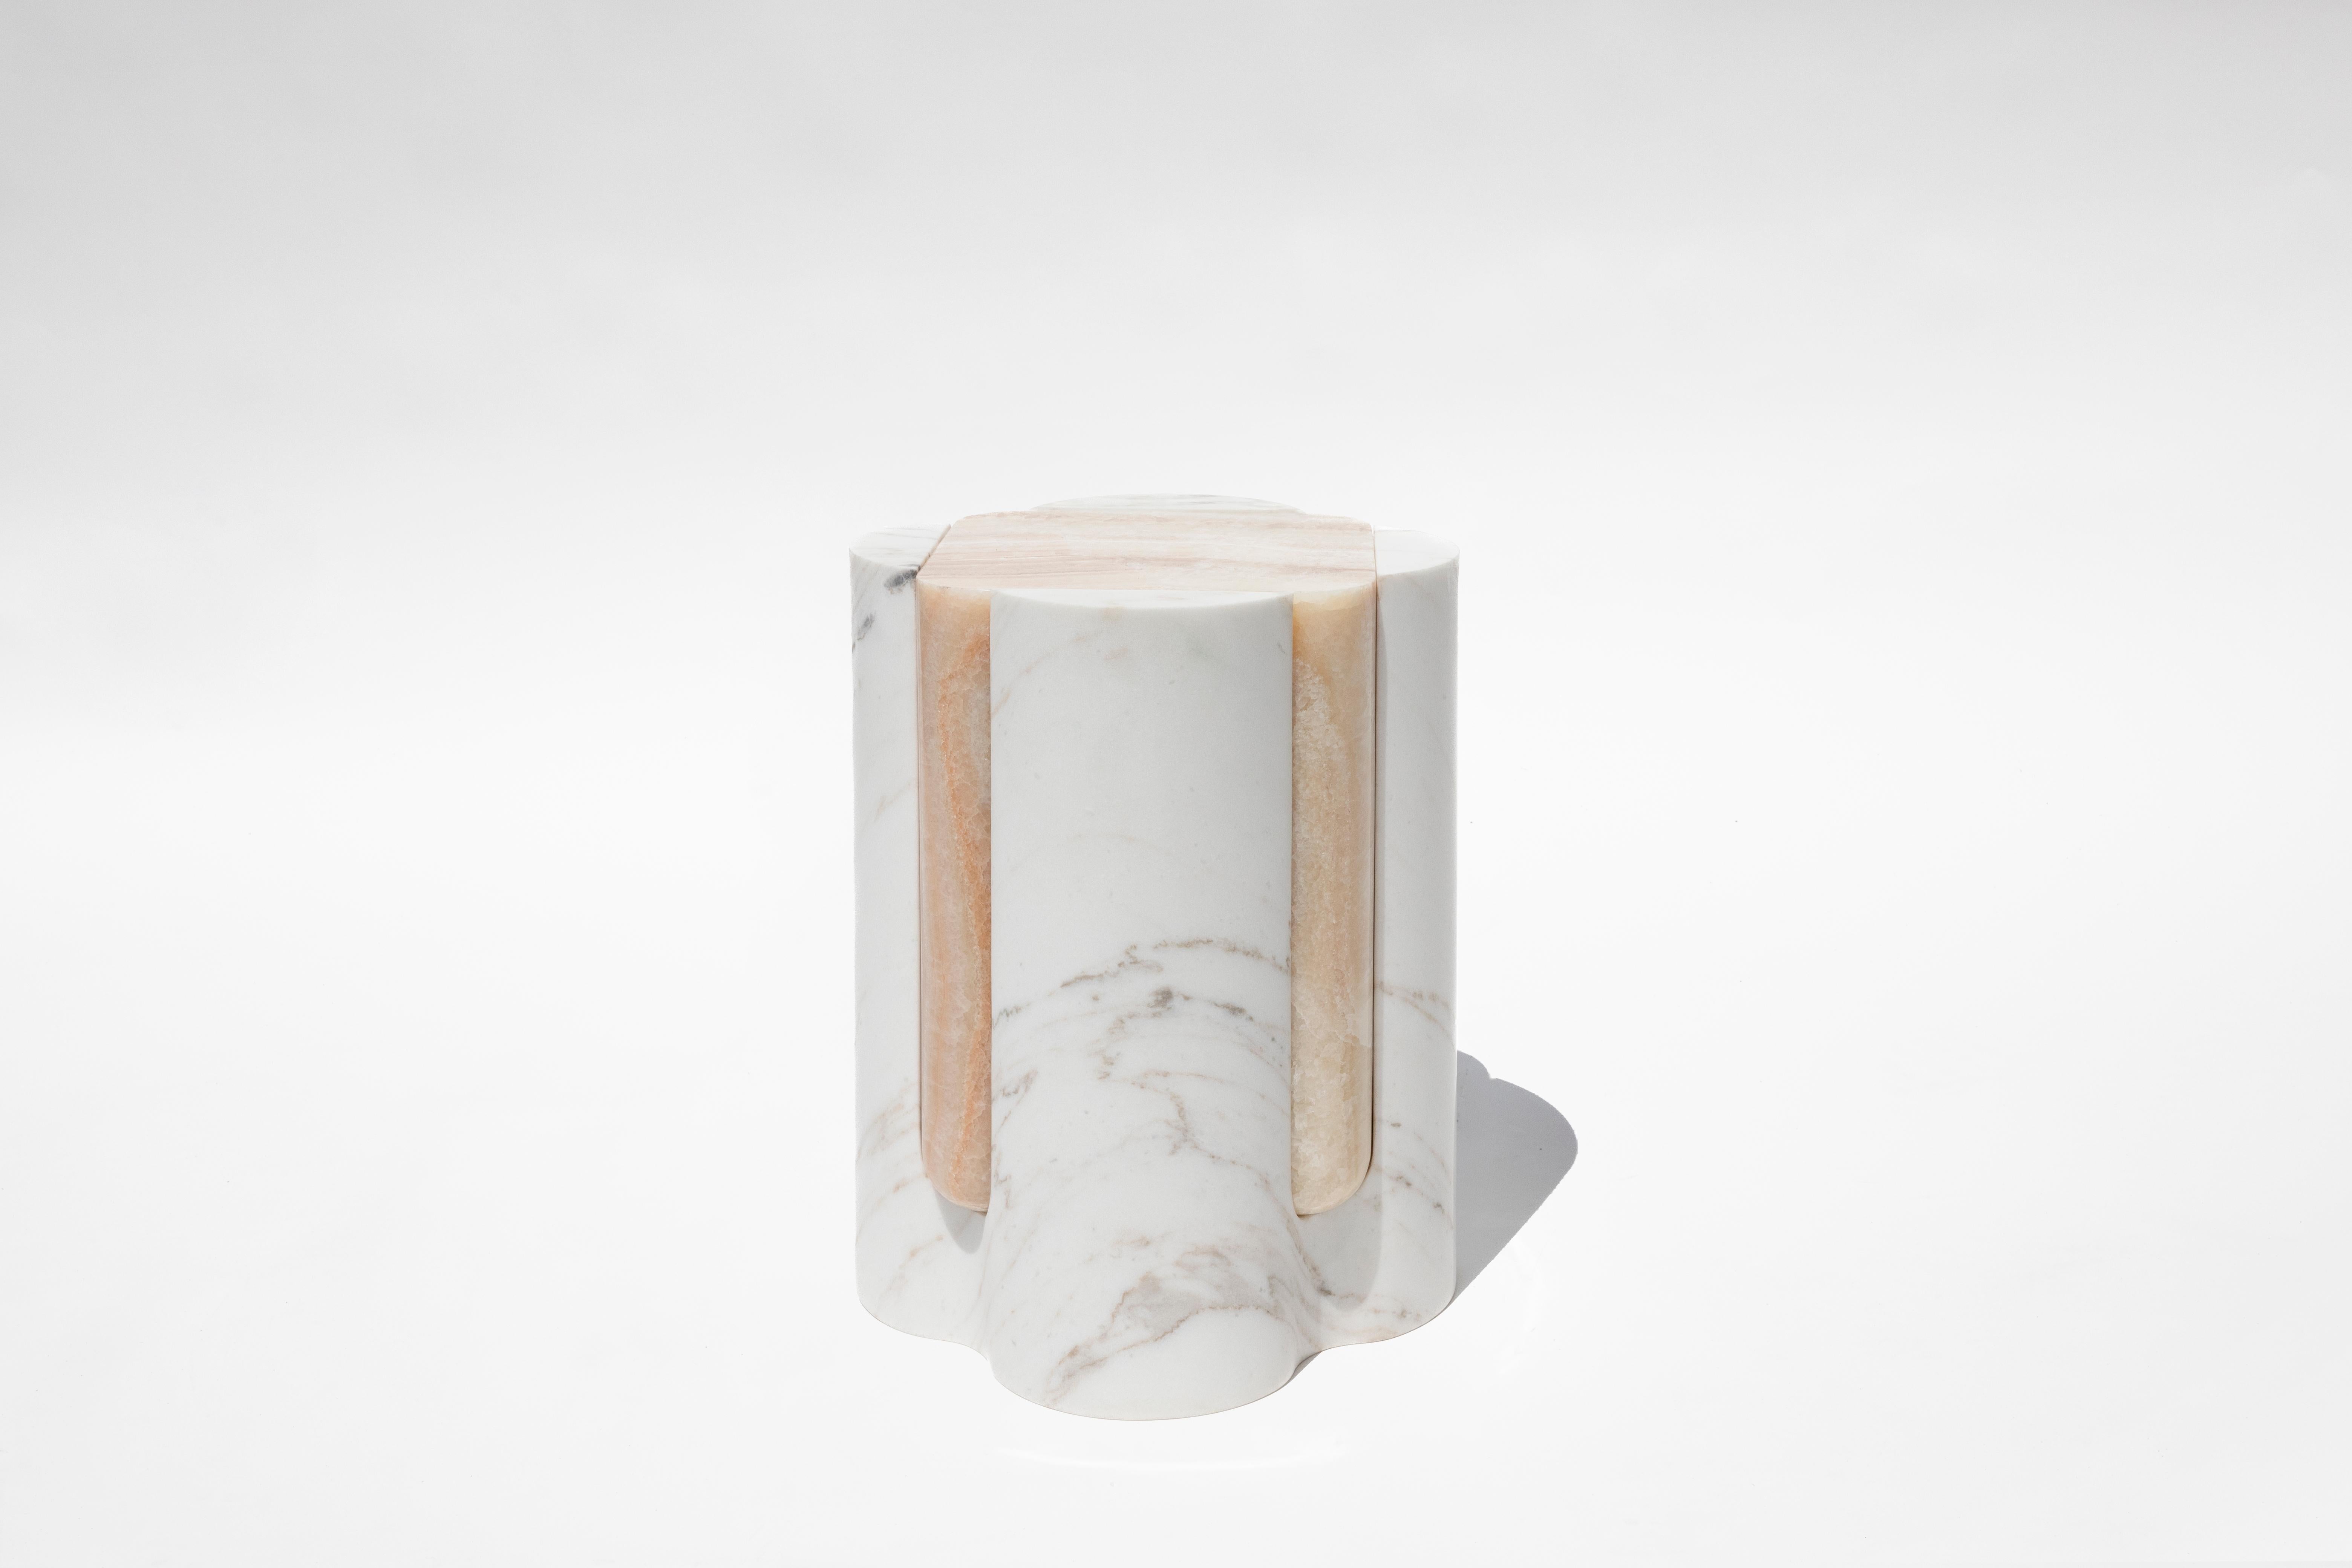 Mexican Volcanic Shade of Marble II Stool/Table by Sten Studio, REP by Tuleste Factory